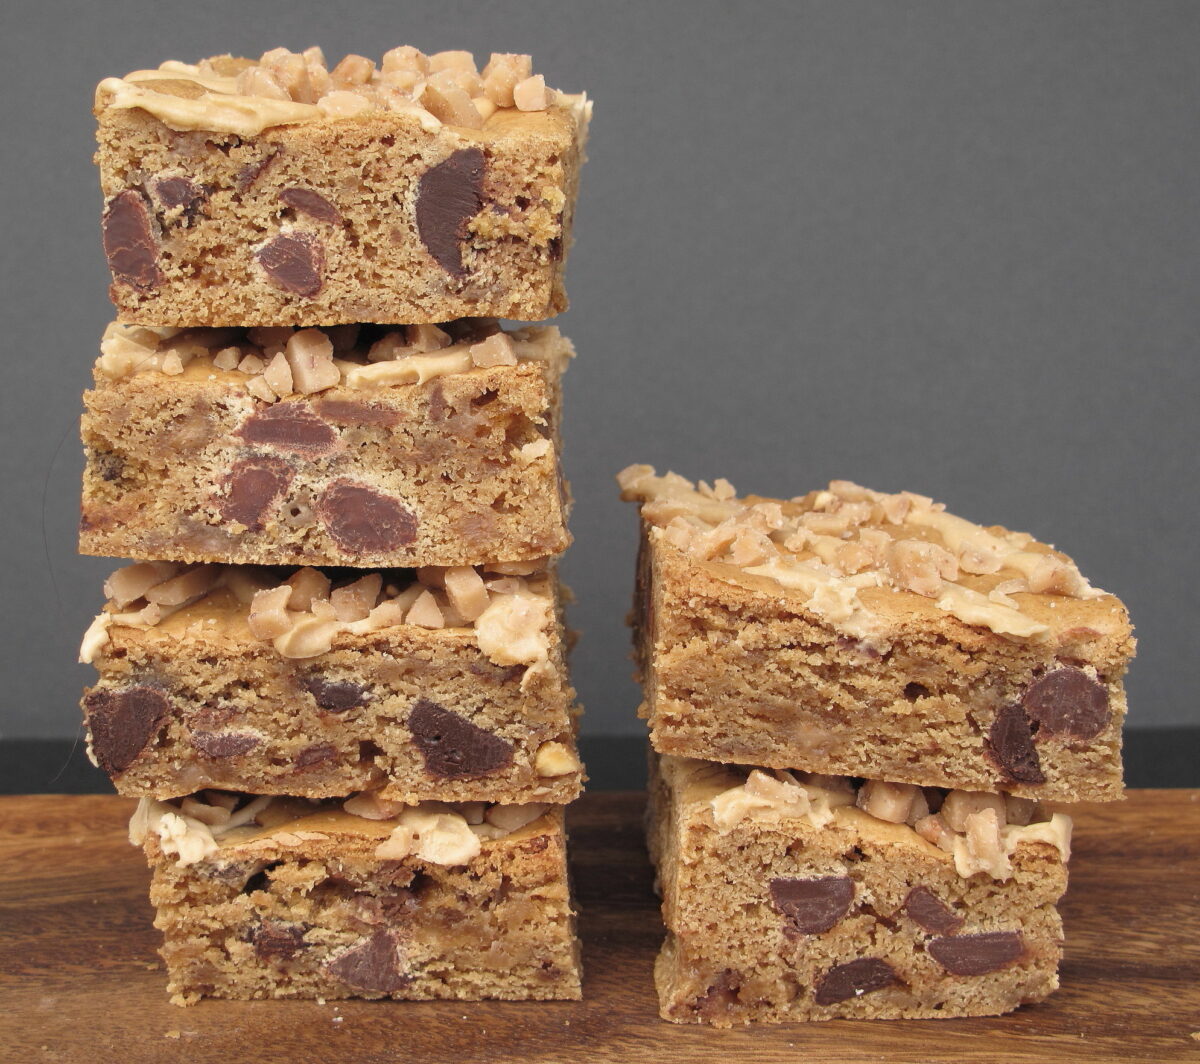 Two stacks of Biscoff Toffee Crunch Bars filled with chocolate chips.